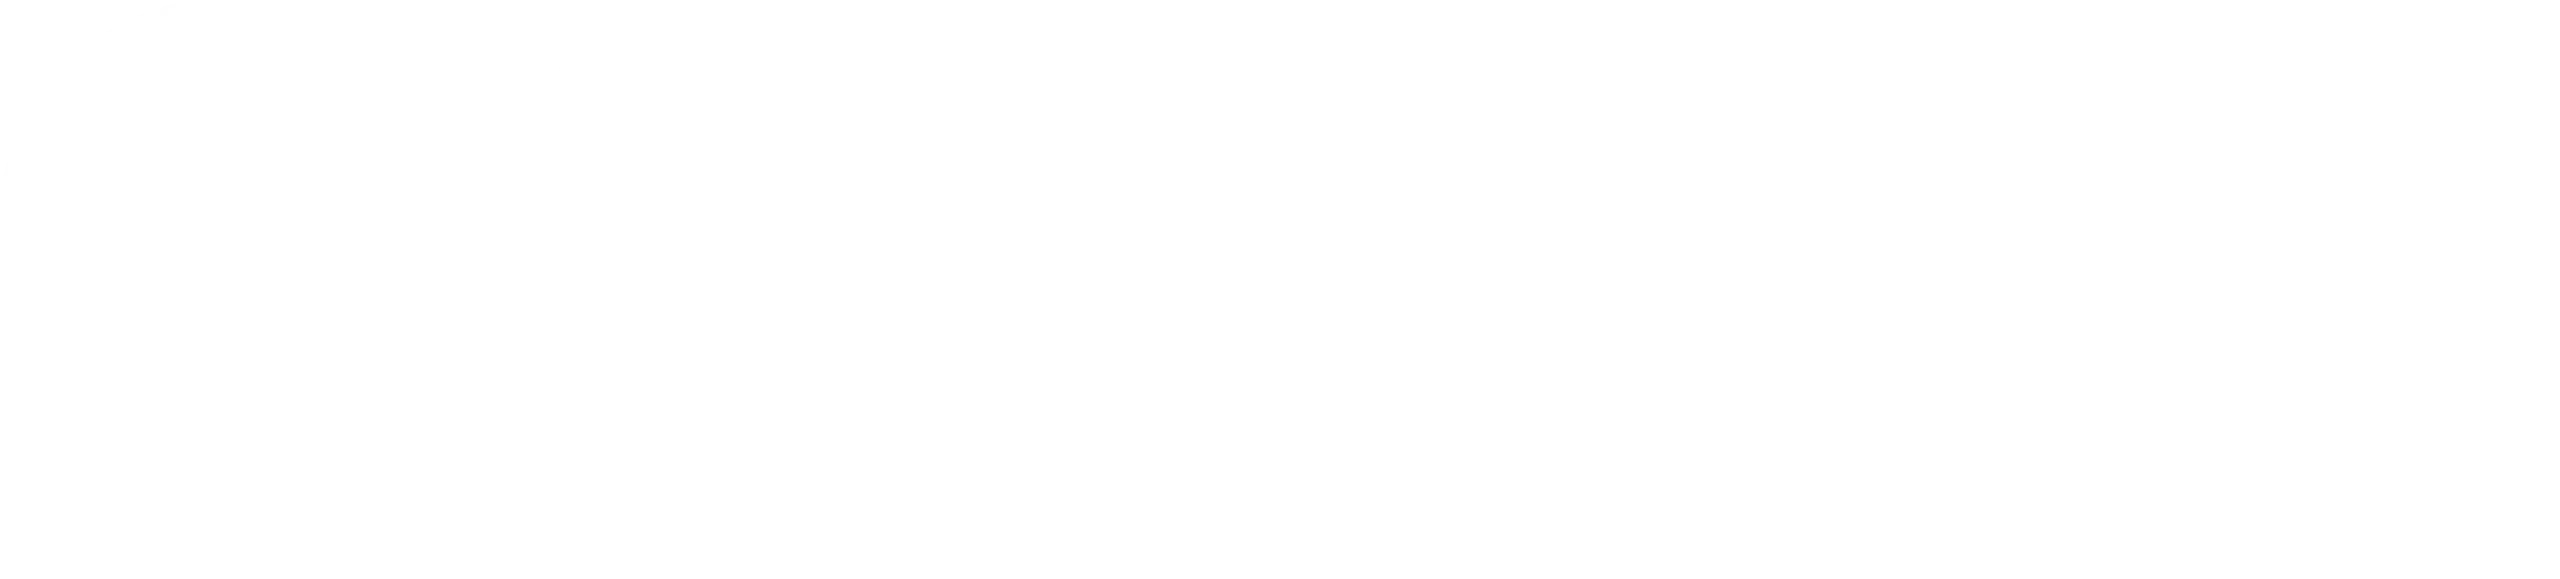 The Pathways Youth Support Center logo